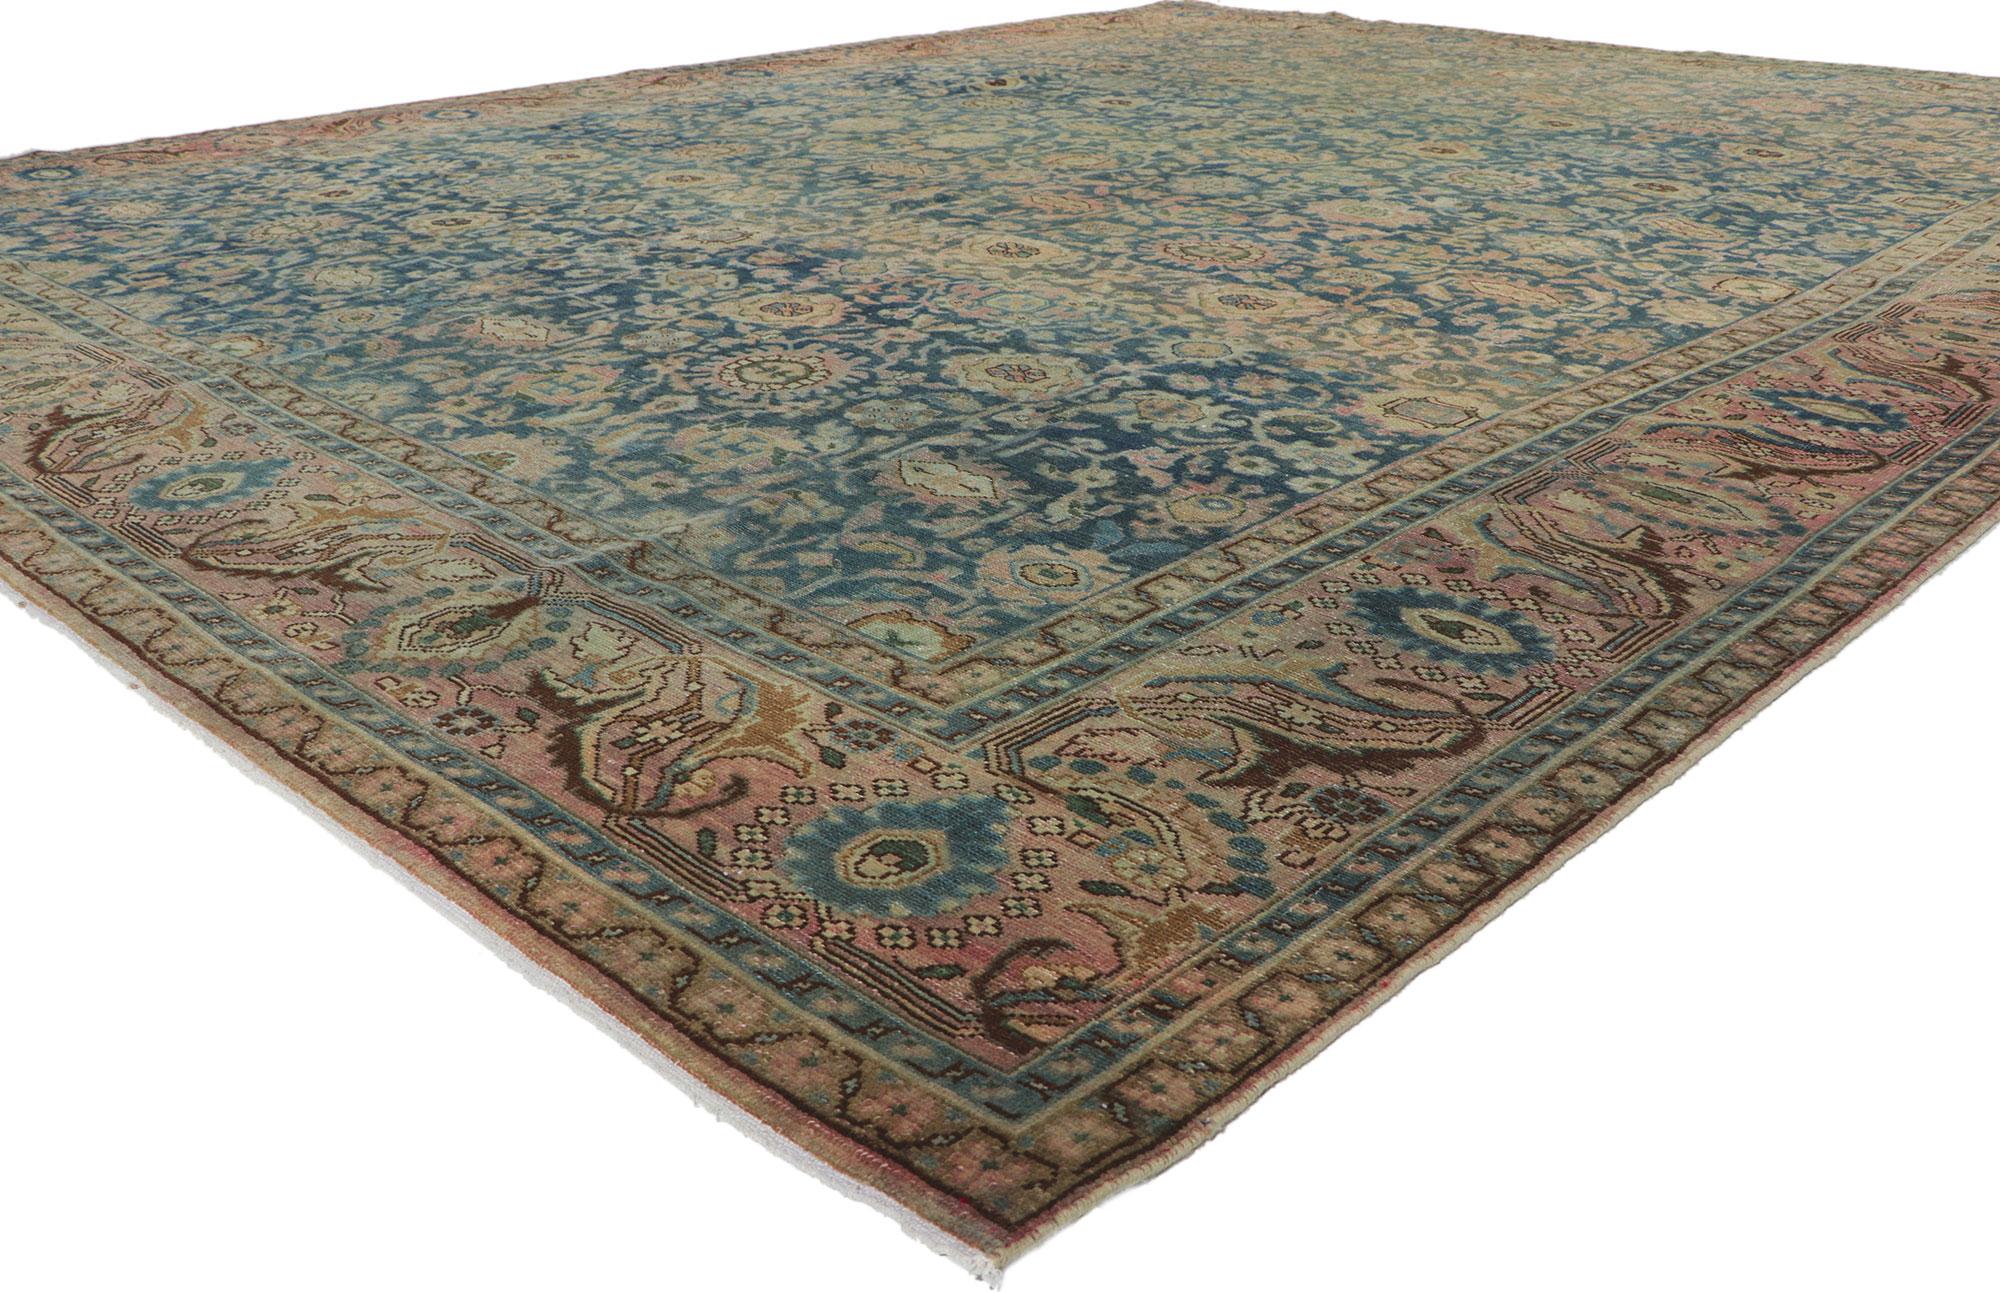 ​61075 Distressed Vintage Persian Malayer Rug, 10'07 x 13'06. 
Displaying a relaxed style and lovingly time-worn composition, this hand-knotted wool distressed vintage Persian Malayer rug is a captivating vision of woven beauty. The antique-washed